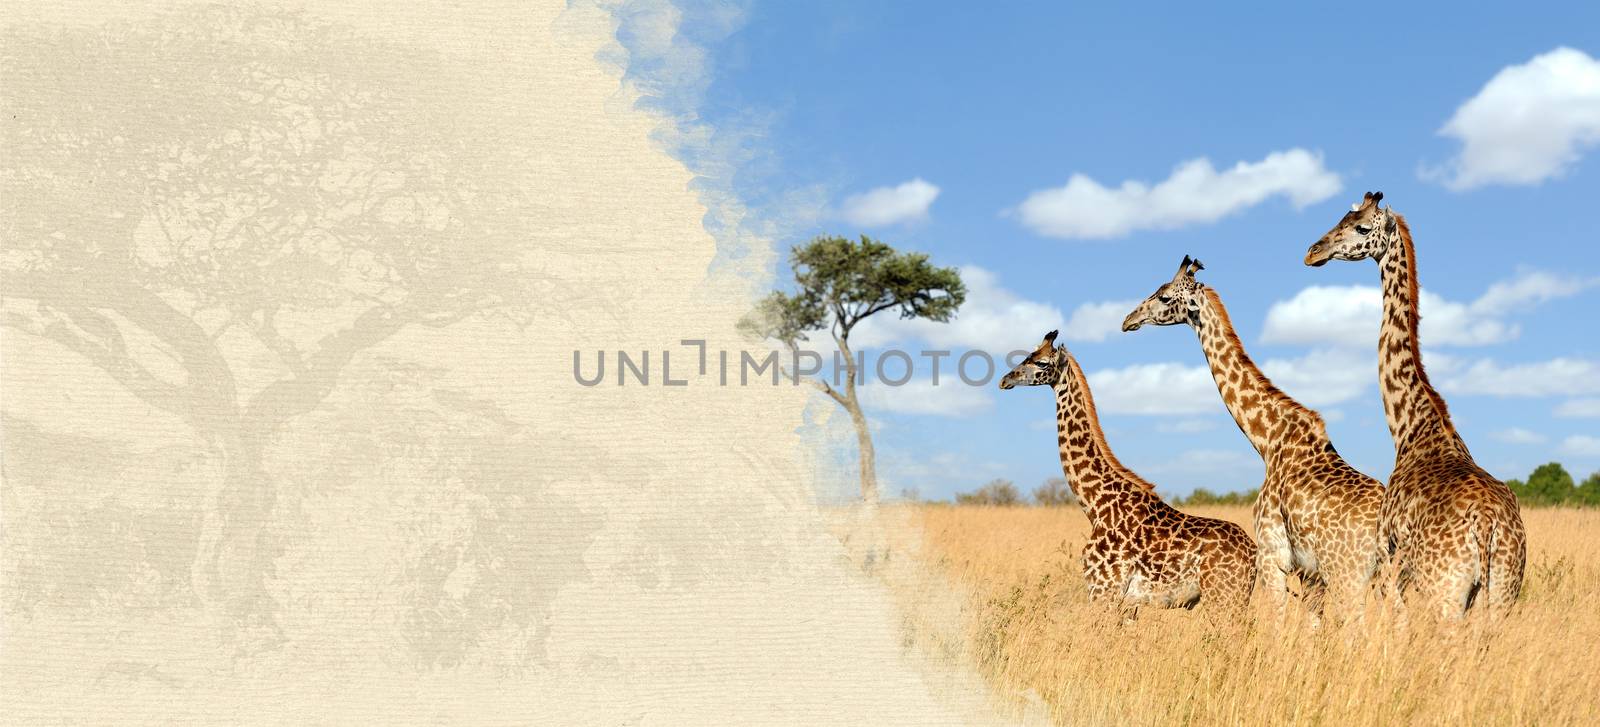 Giraffe on textured paper. Animal on a background of old paper